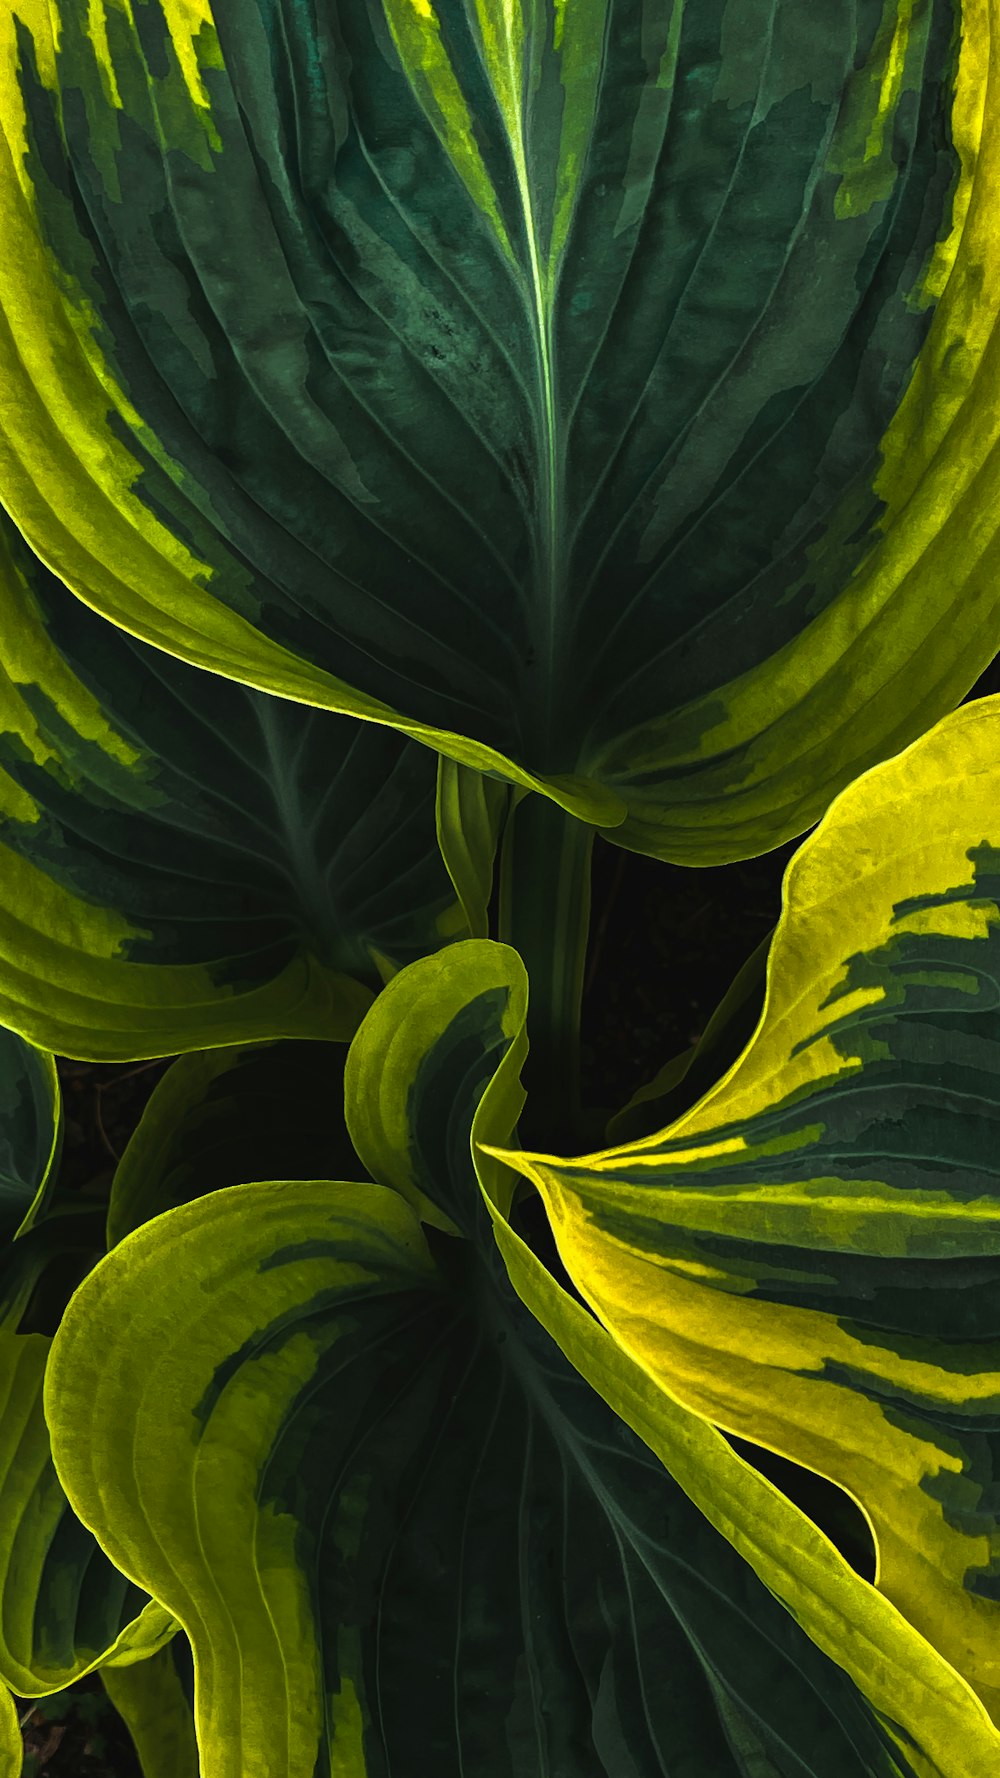 green and yellow leaves in close up photography